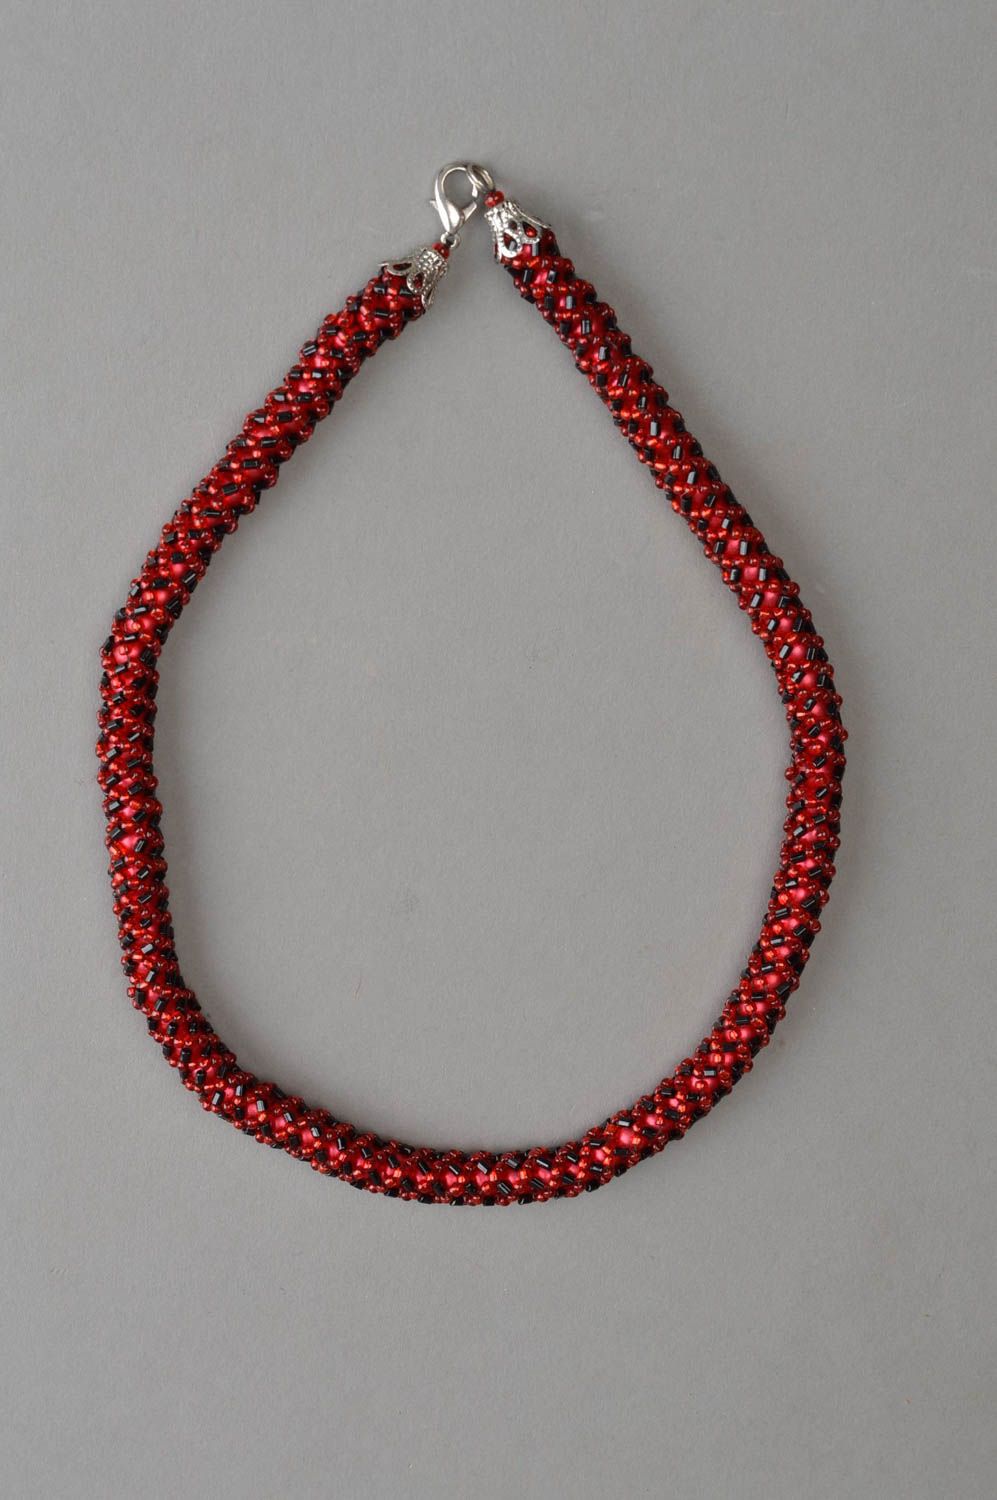 Stylish handmade beaded cord necklace unusual necklace designs womens jewelry photo 2